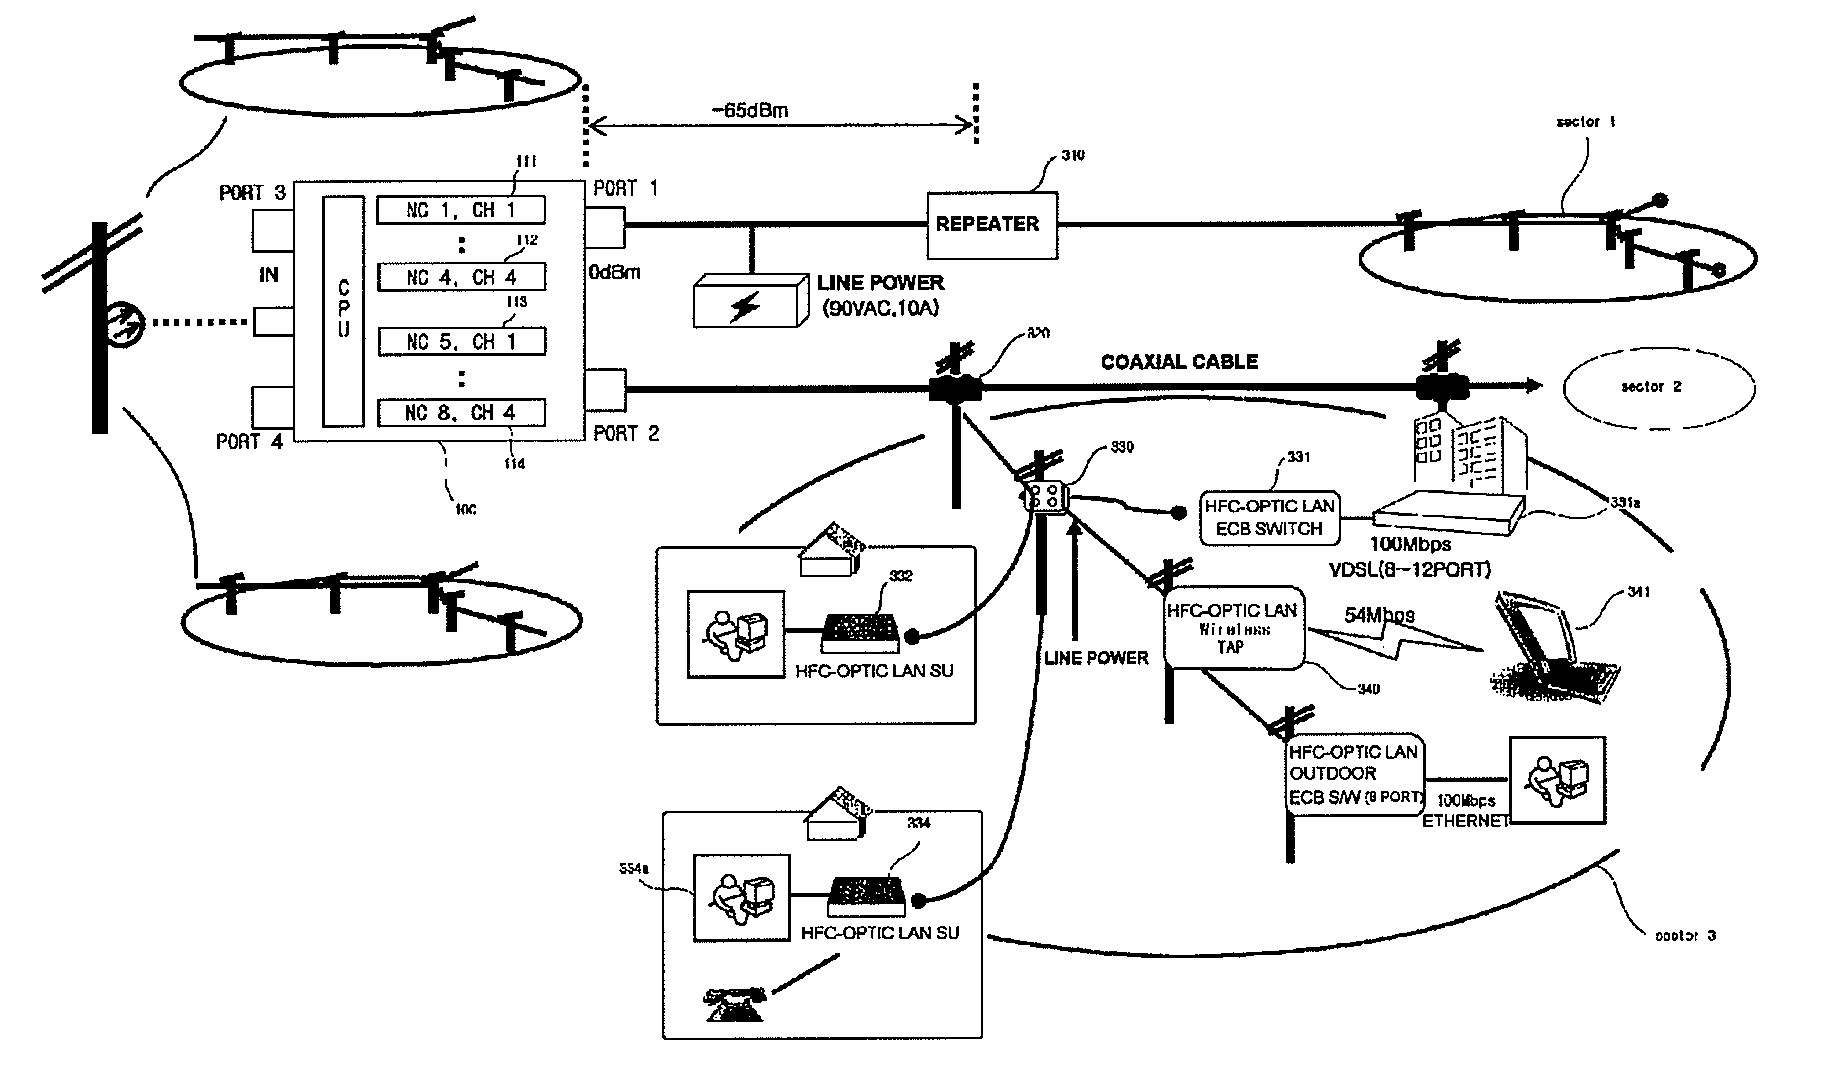 Multi-channel generating system on wired network